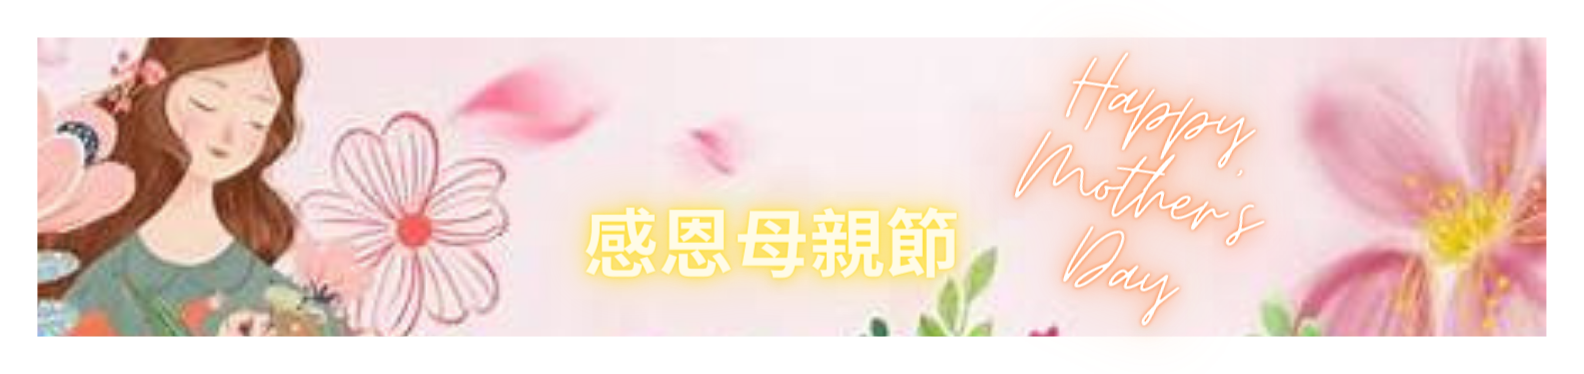 Mothers day banner.png